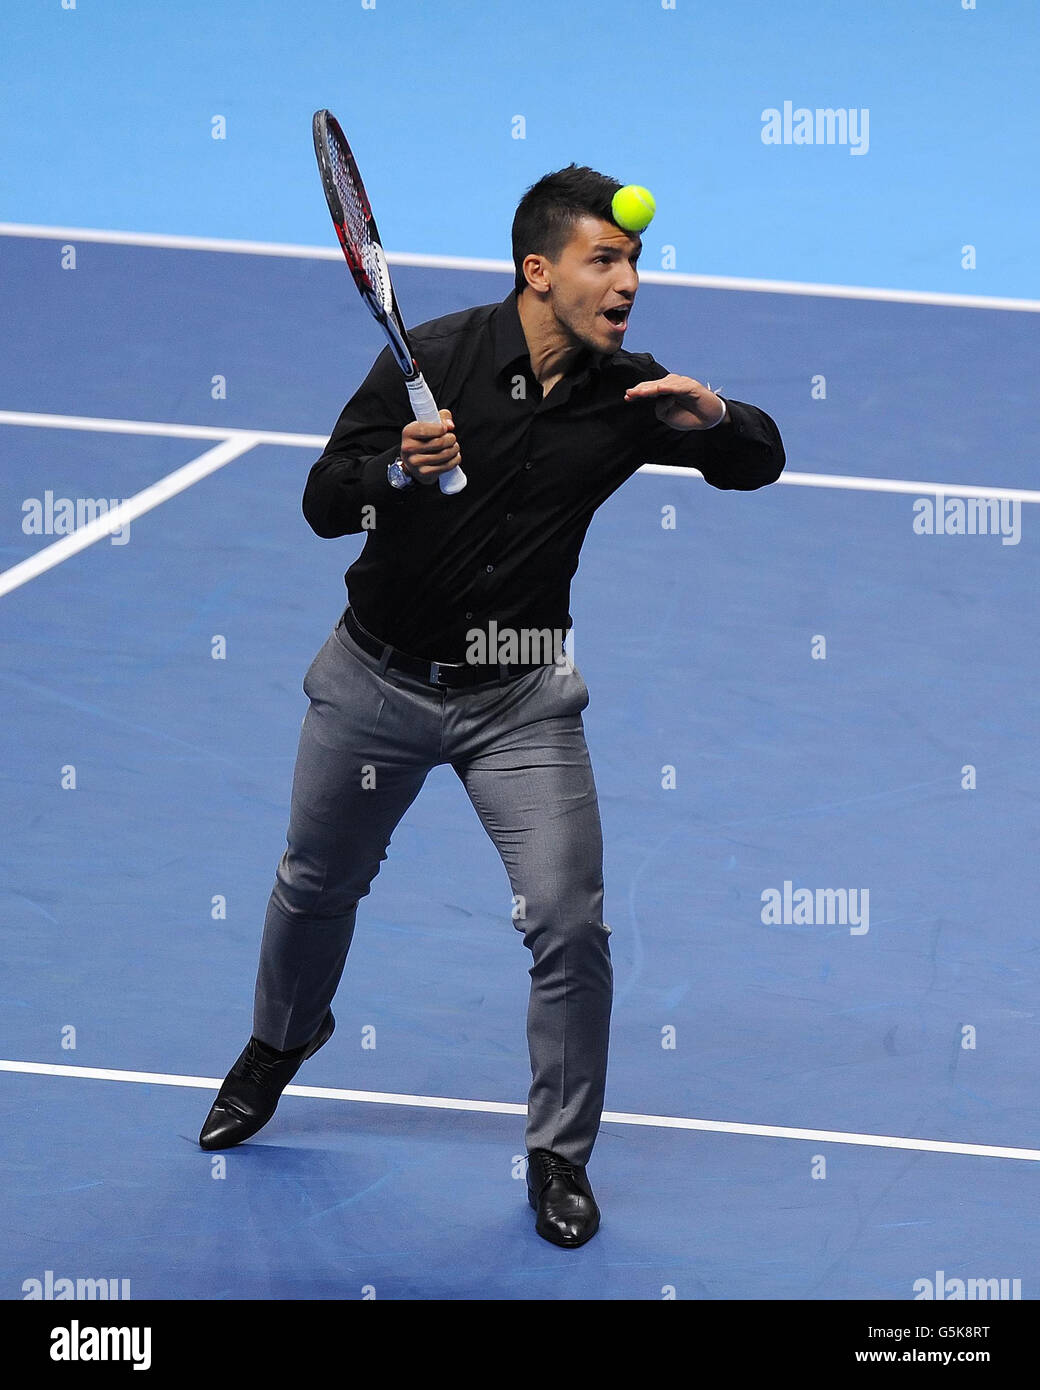 Manchester City striker Sergio Aguero heads a tennis ball as he plays tennis with Argentina's Juan Martin del Potro (not pictured) following del Potro's match against Serbia's Janko Tipsarevic during the Barclays ATP World Tour Finals at the O2 Arena, London. Stock Photo